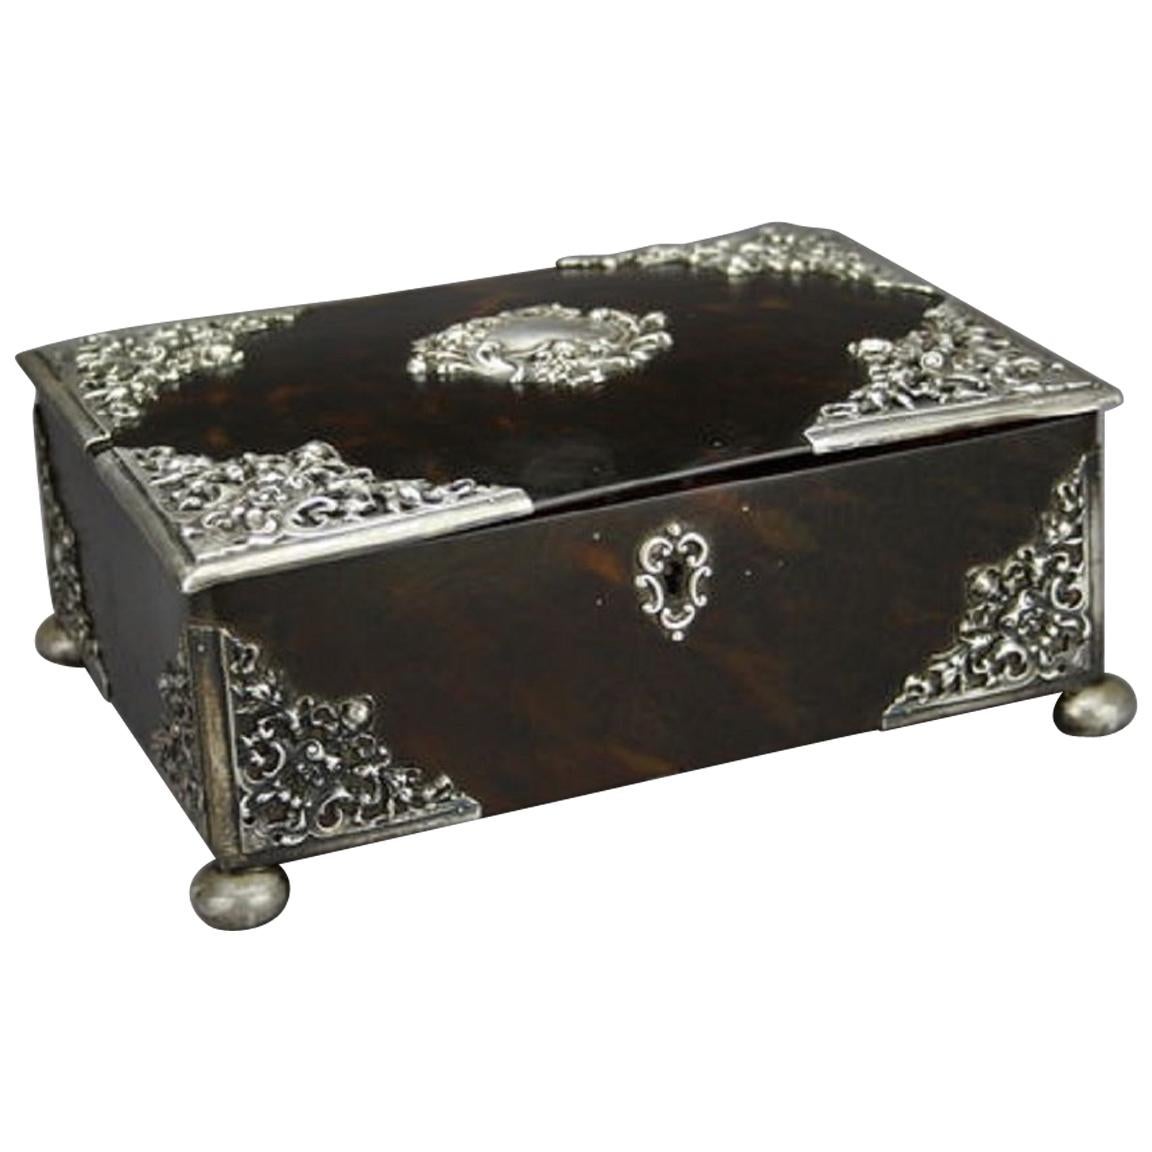 Victorian Tortoiseshell and Silver-Mounted Jewelry Casket For Sale